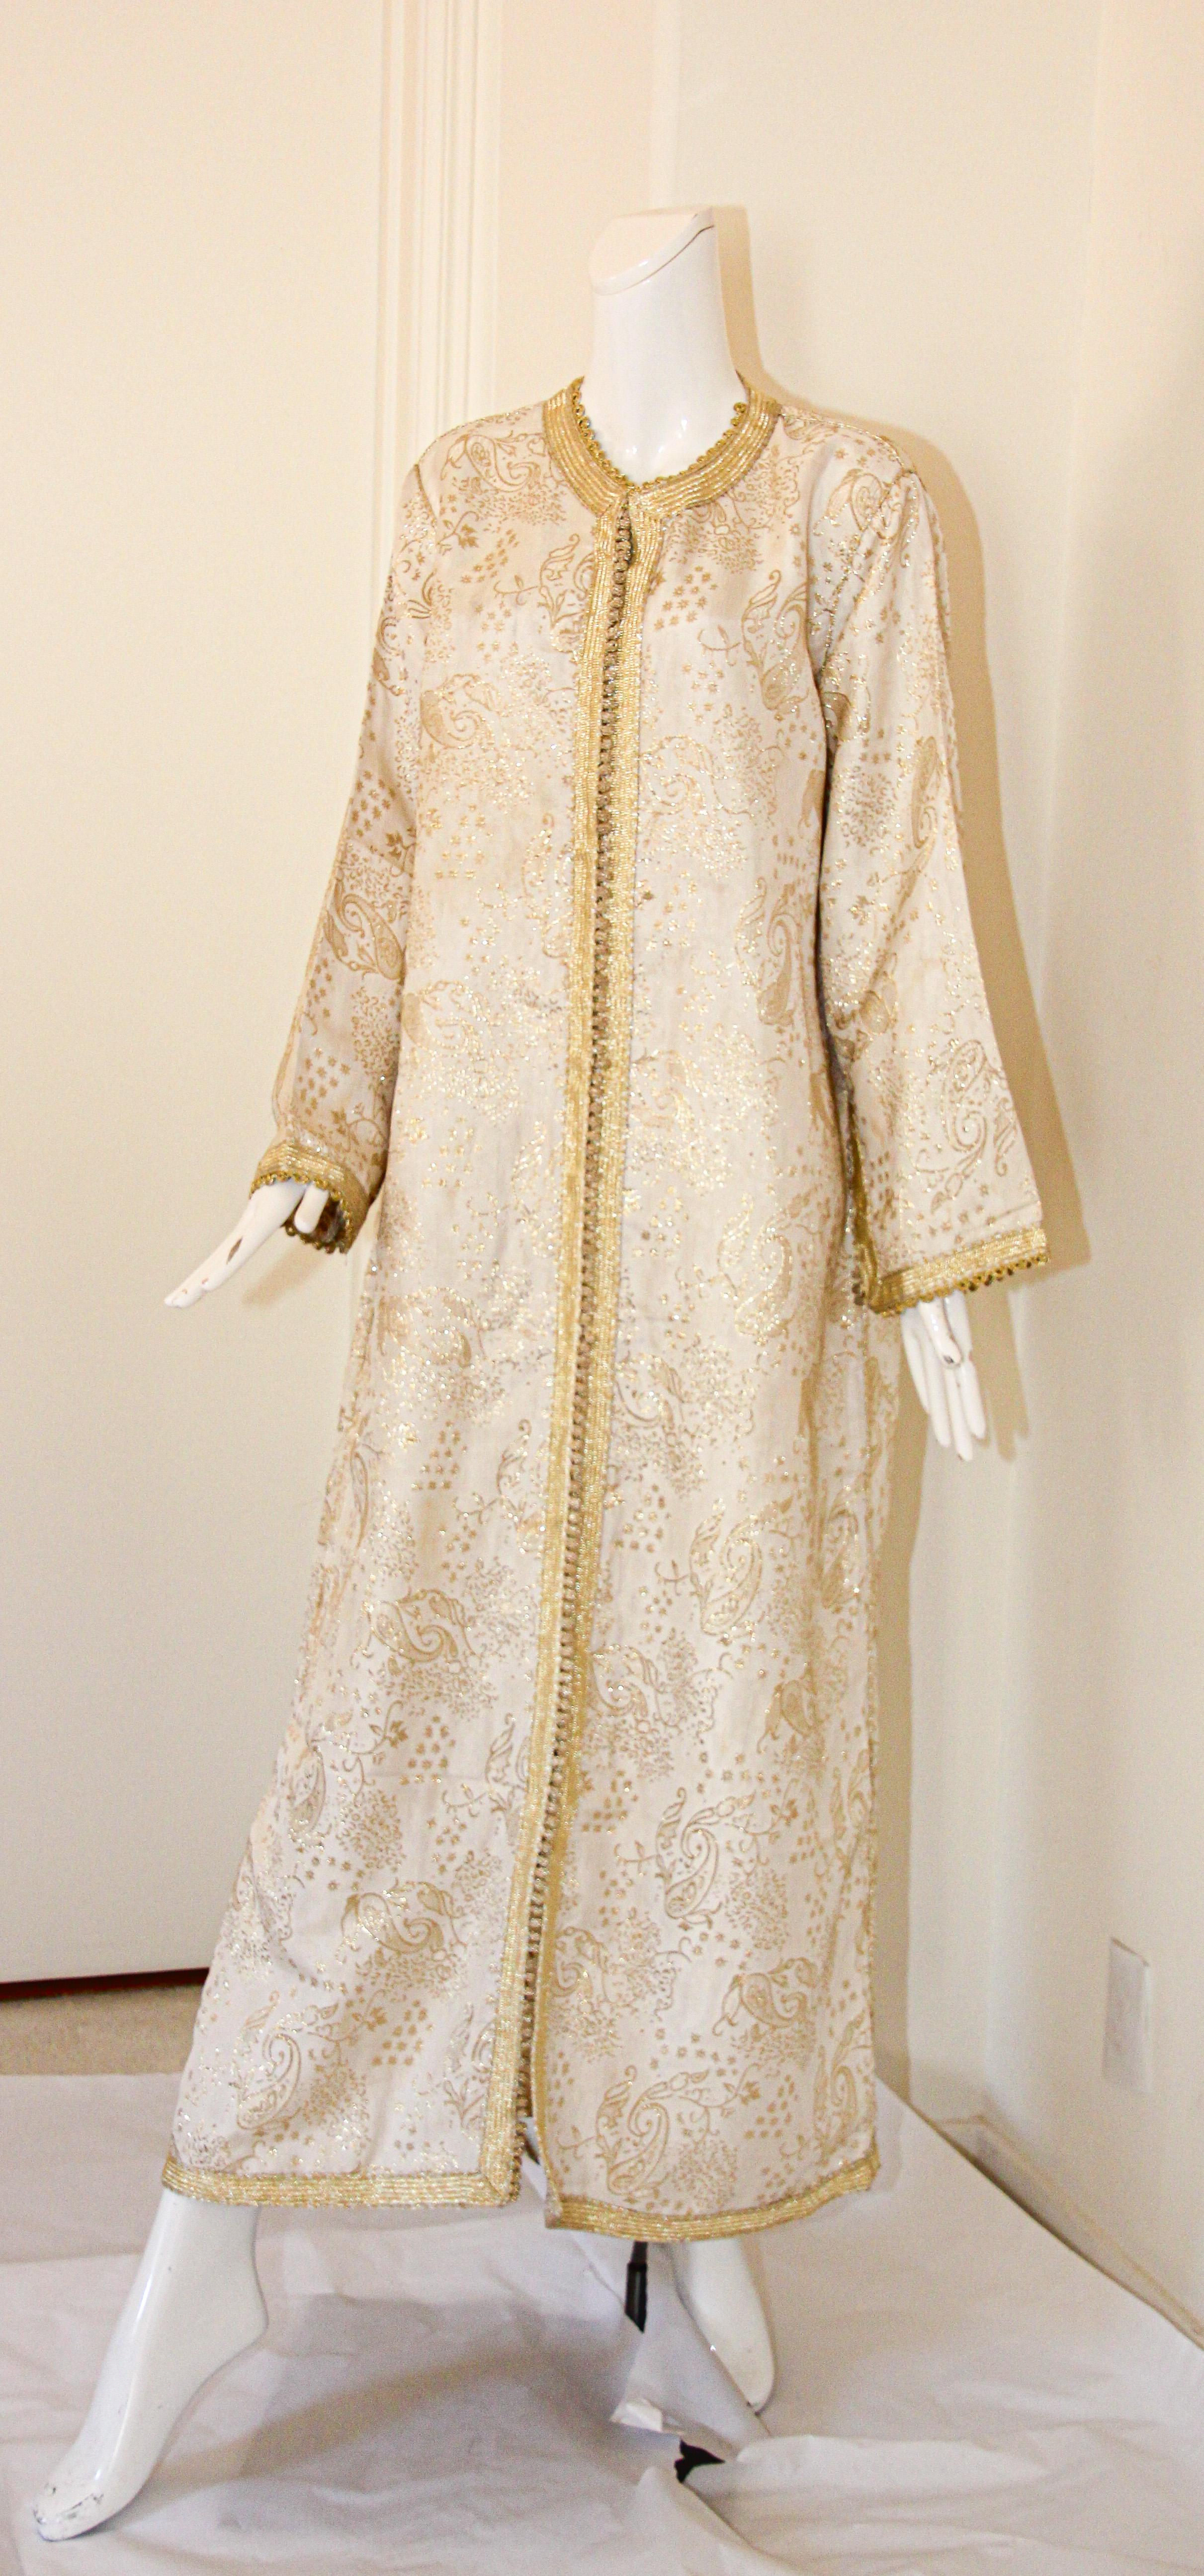 Elegant Moroccan white caftan with gold lame metallic floral brocade,
This is an exceptional example of Moroccan fashion design dating to the 1970s,
Handcrafted in Morocco and tailored for a relaxed fit.
It is trimmed in handcrafted